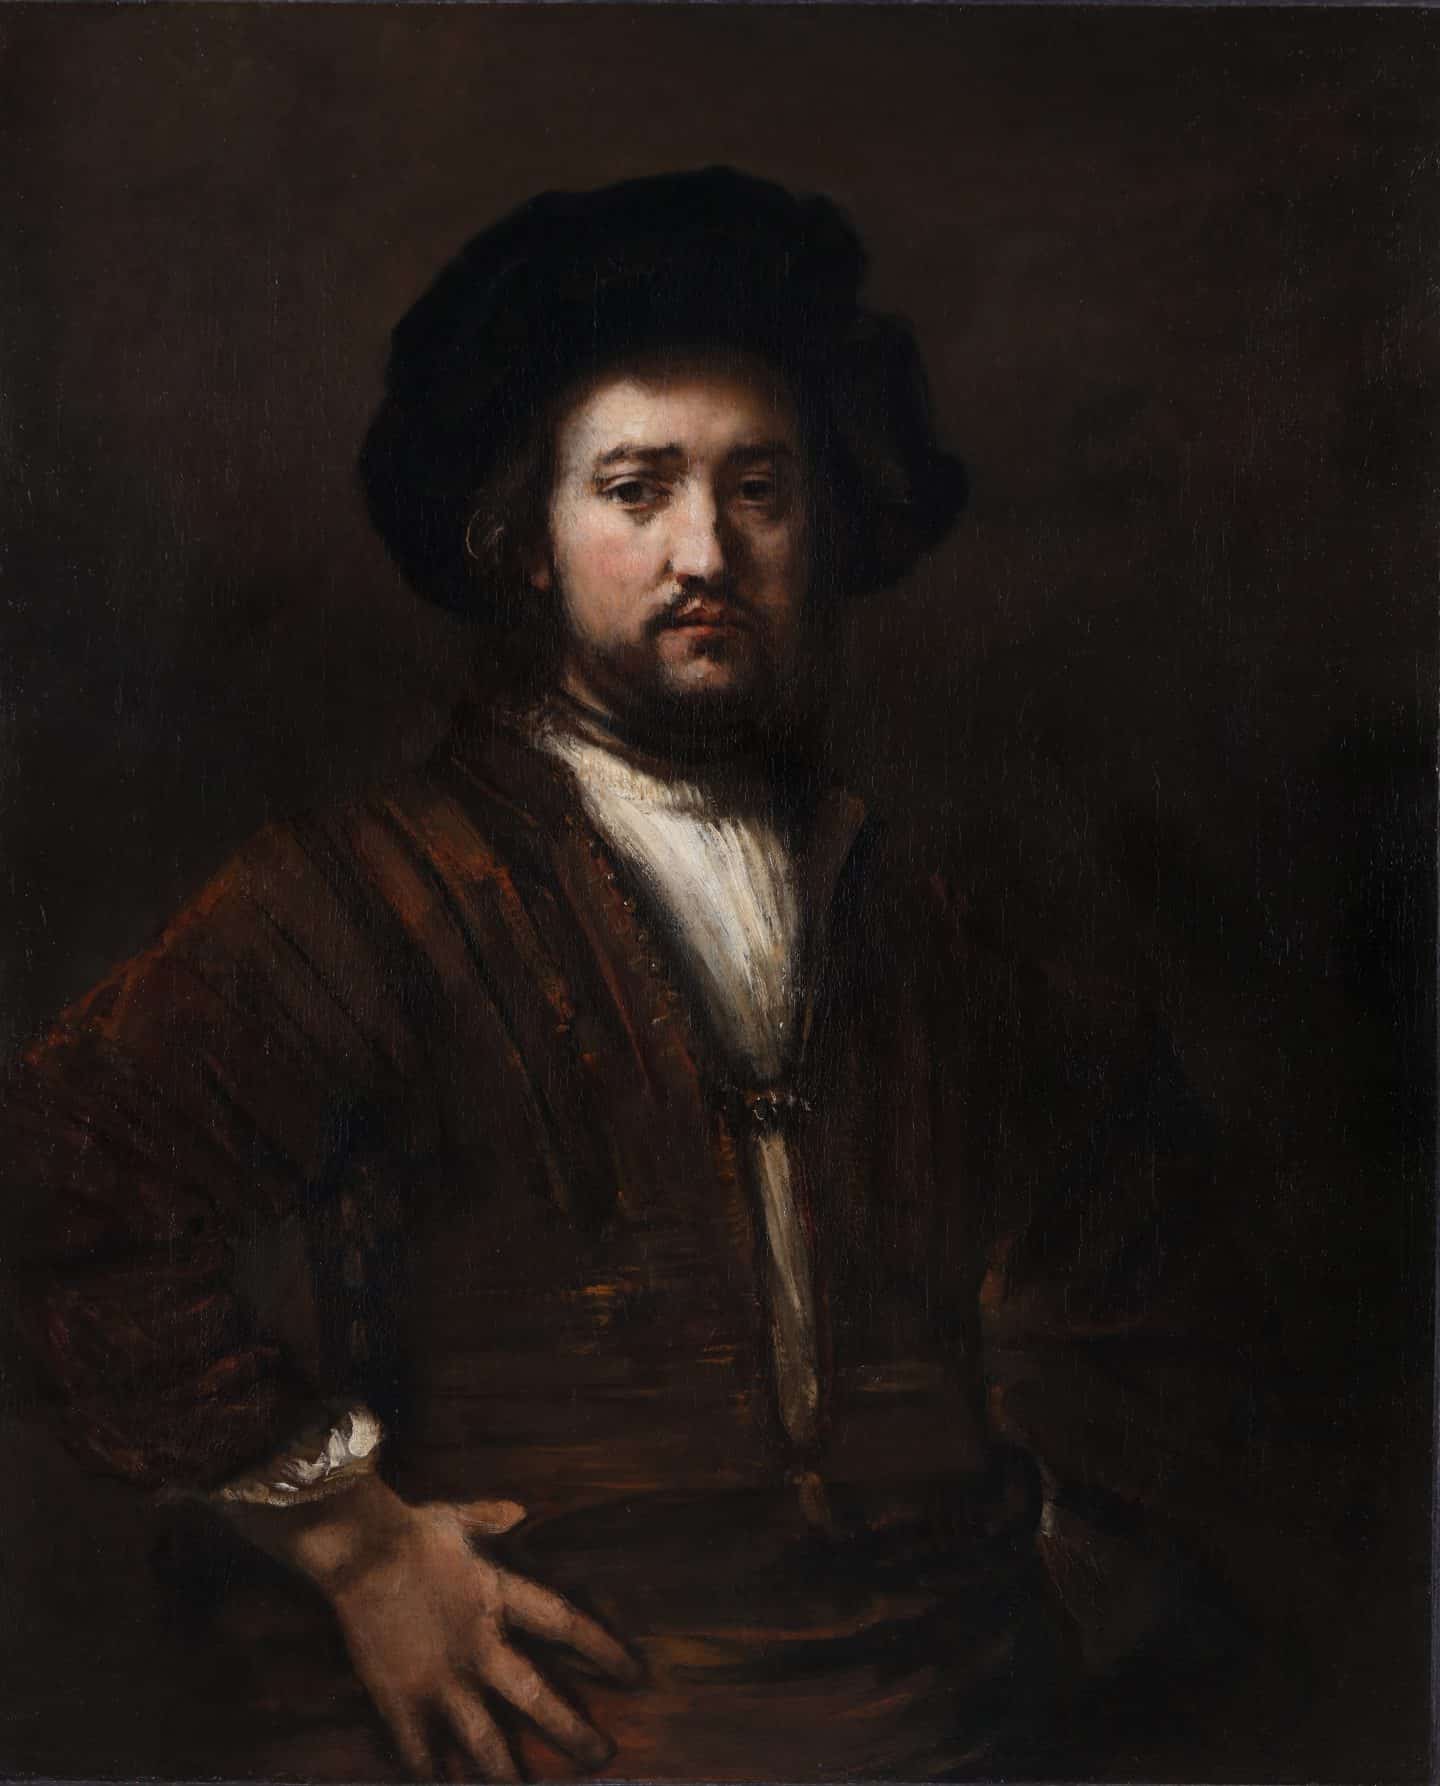 Portrait of a bearded man dressed in a brown jacket over a white shirt and black beret facing us with hands on his hips.